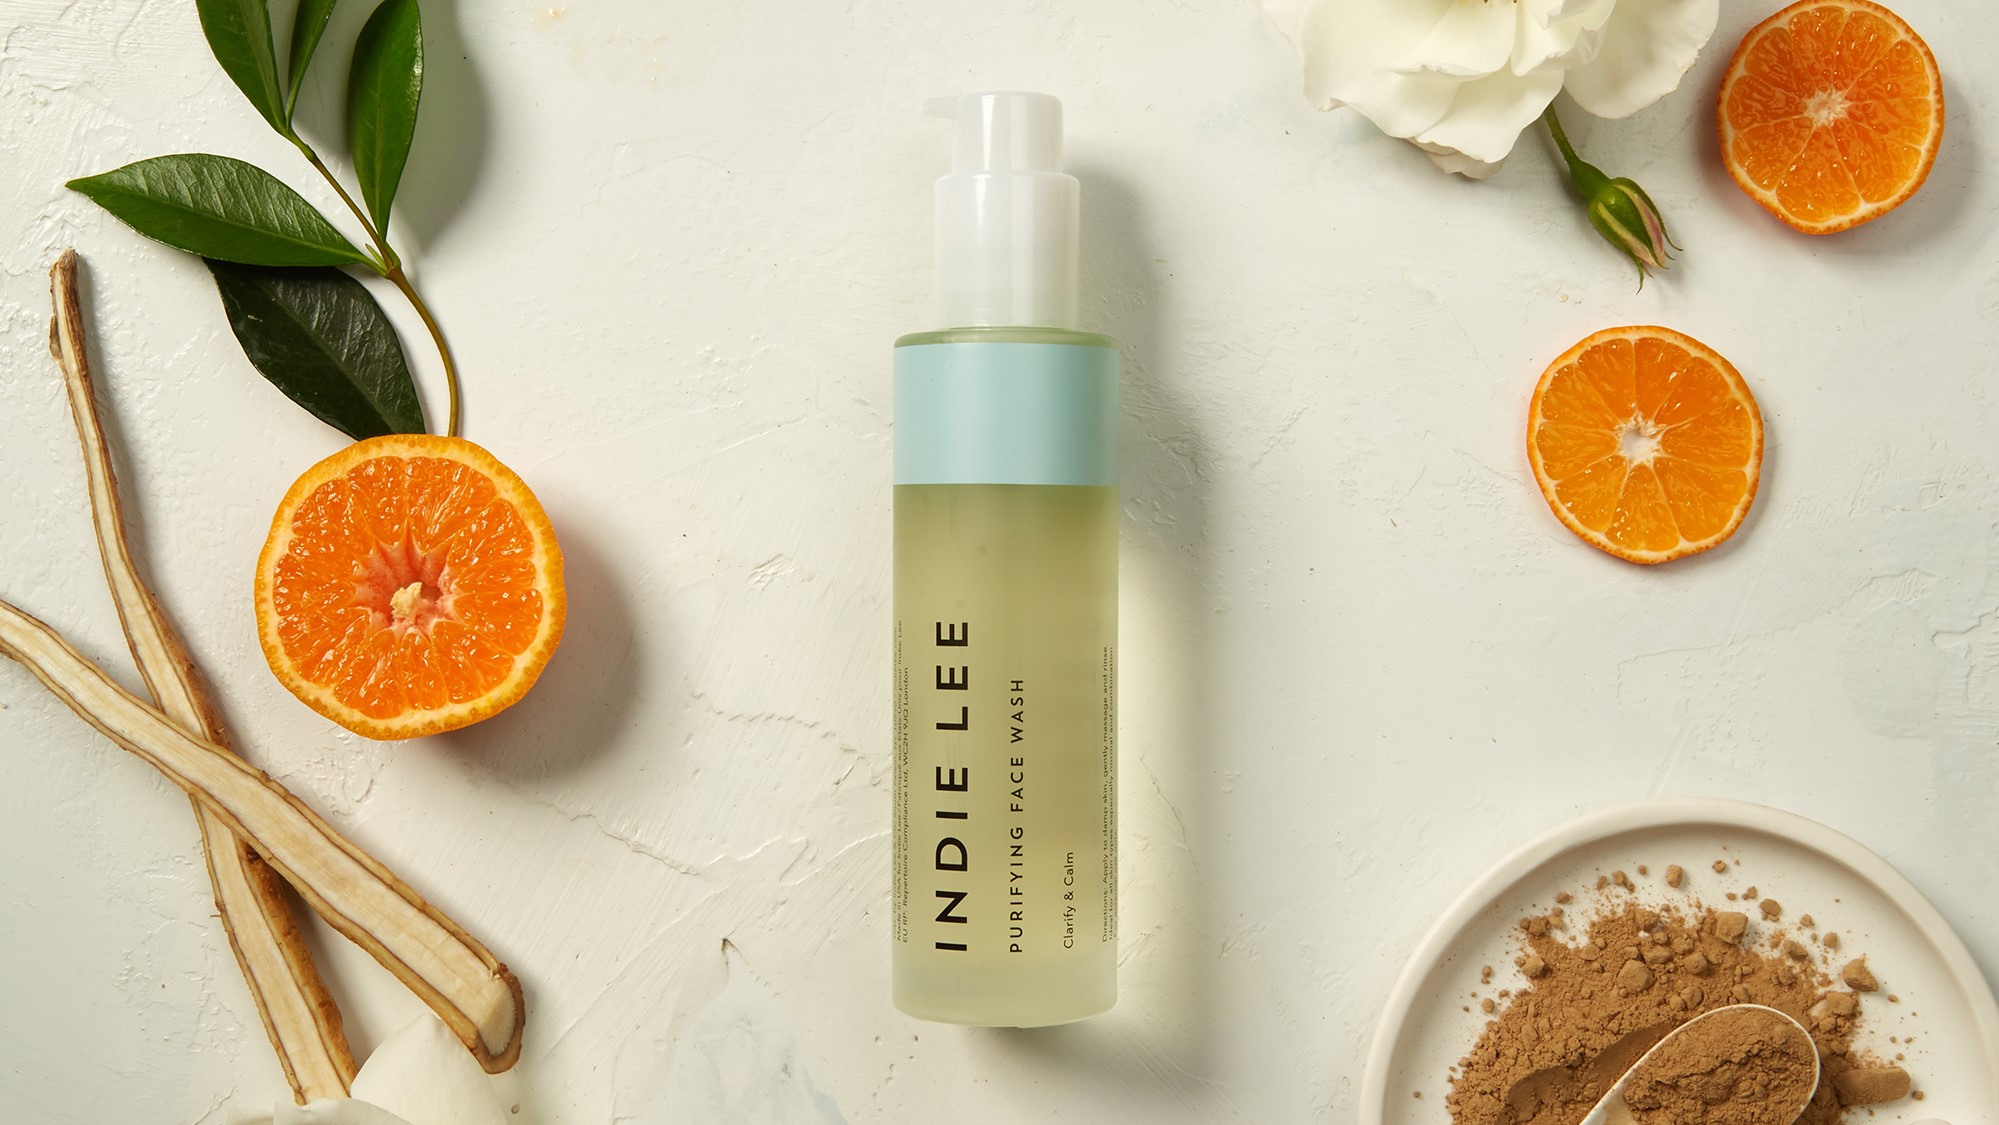 An interview with the founder of Indie Lee Natural Beauty brand